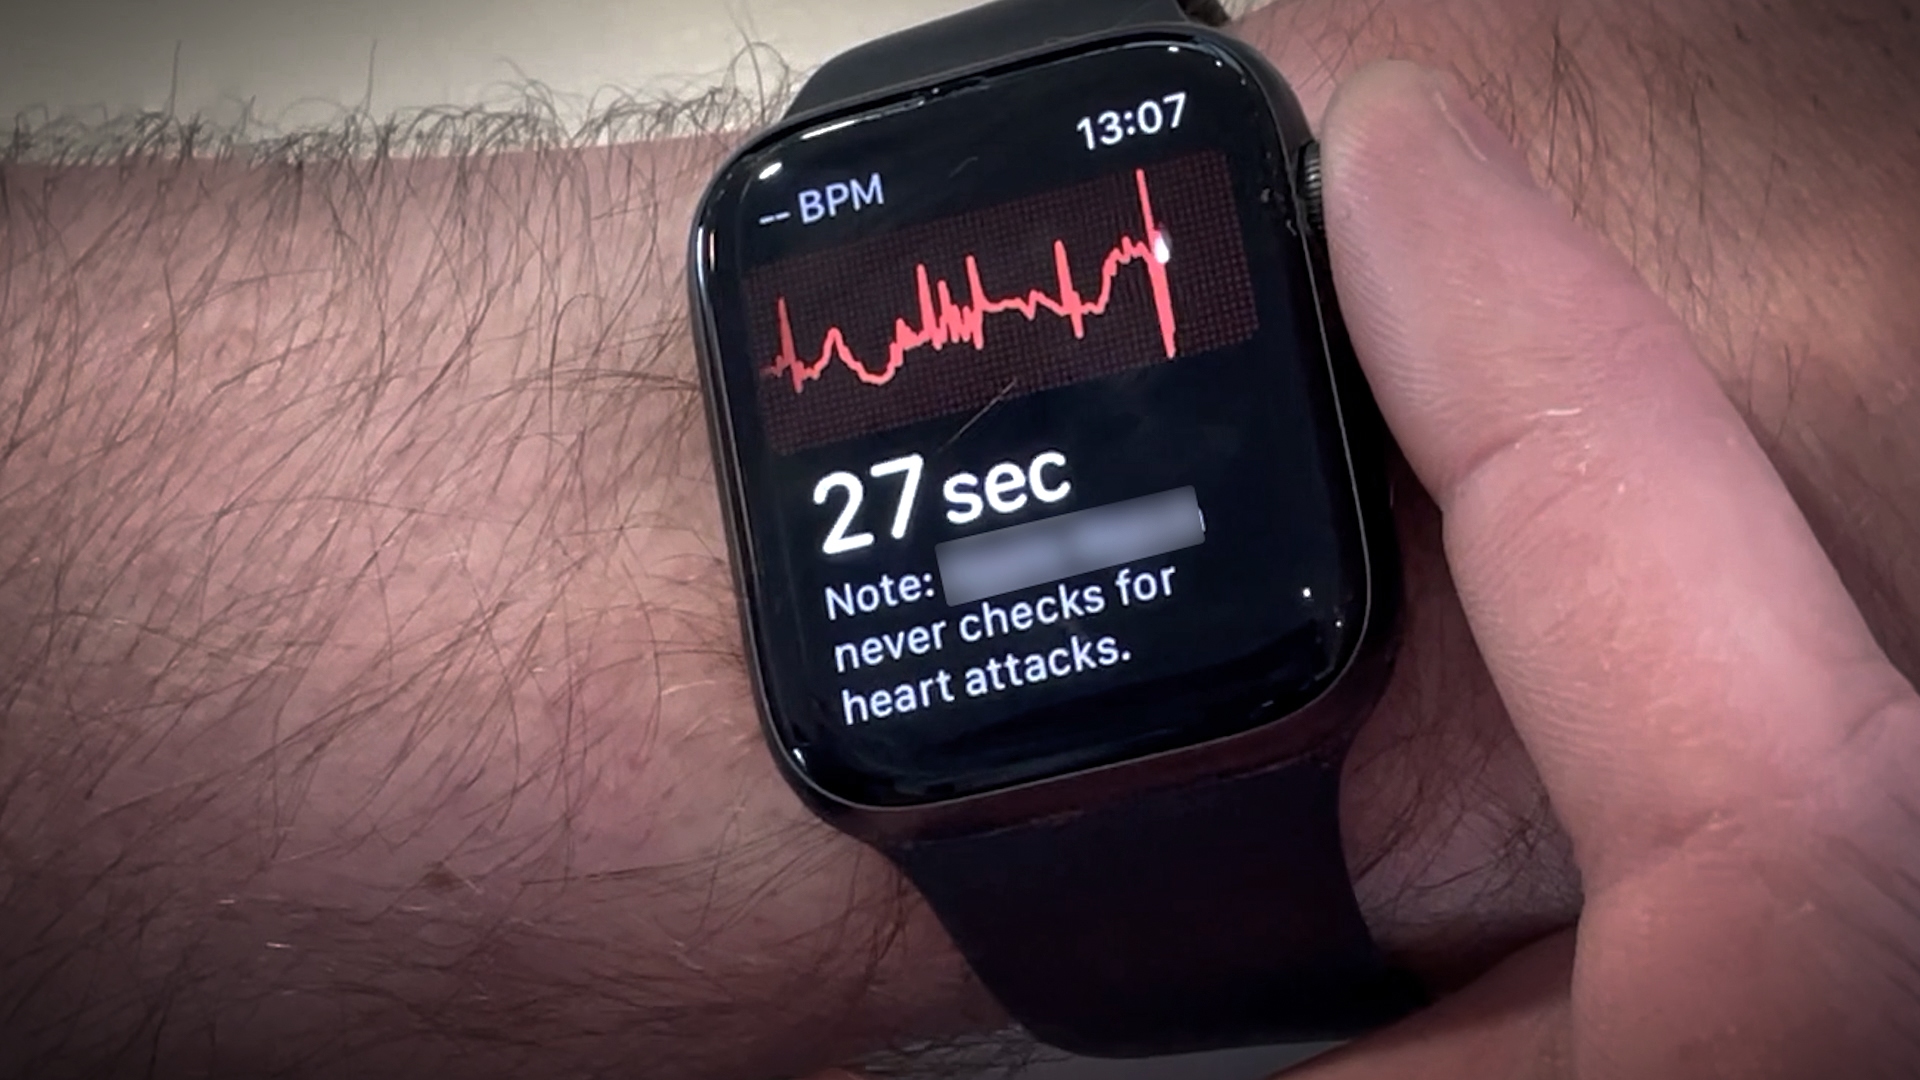 Andrew's smartwatch showed a dangerously low heart rate.